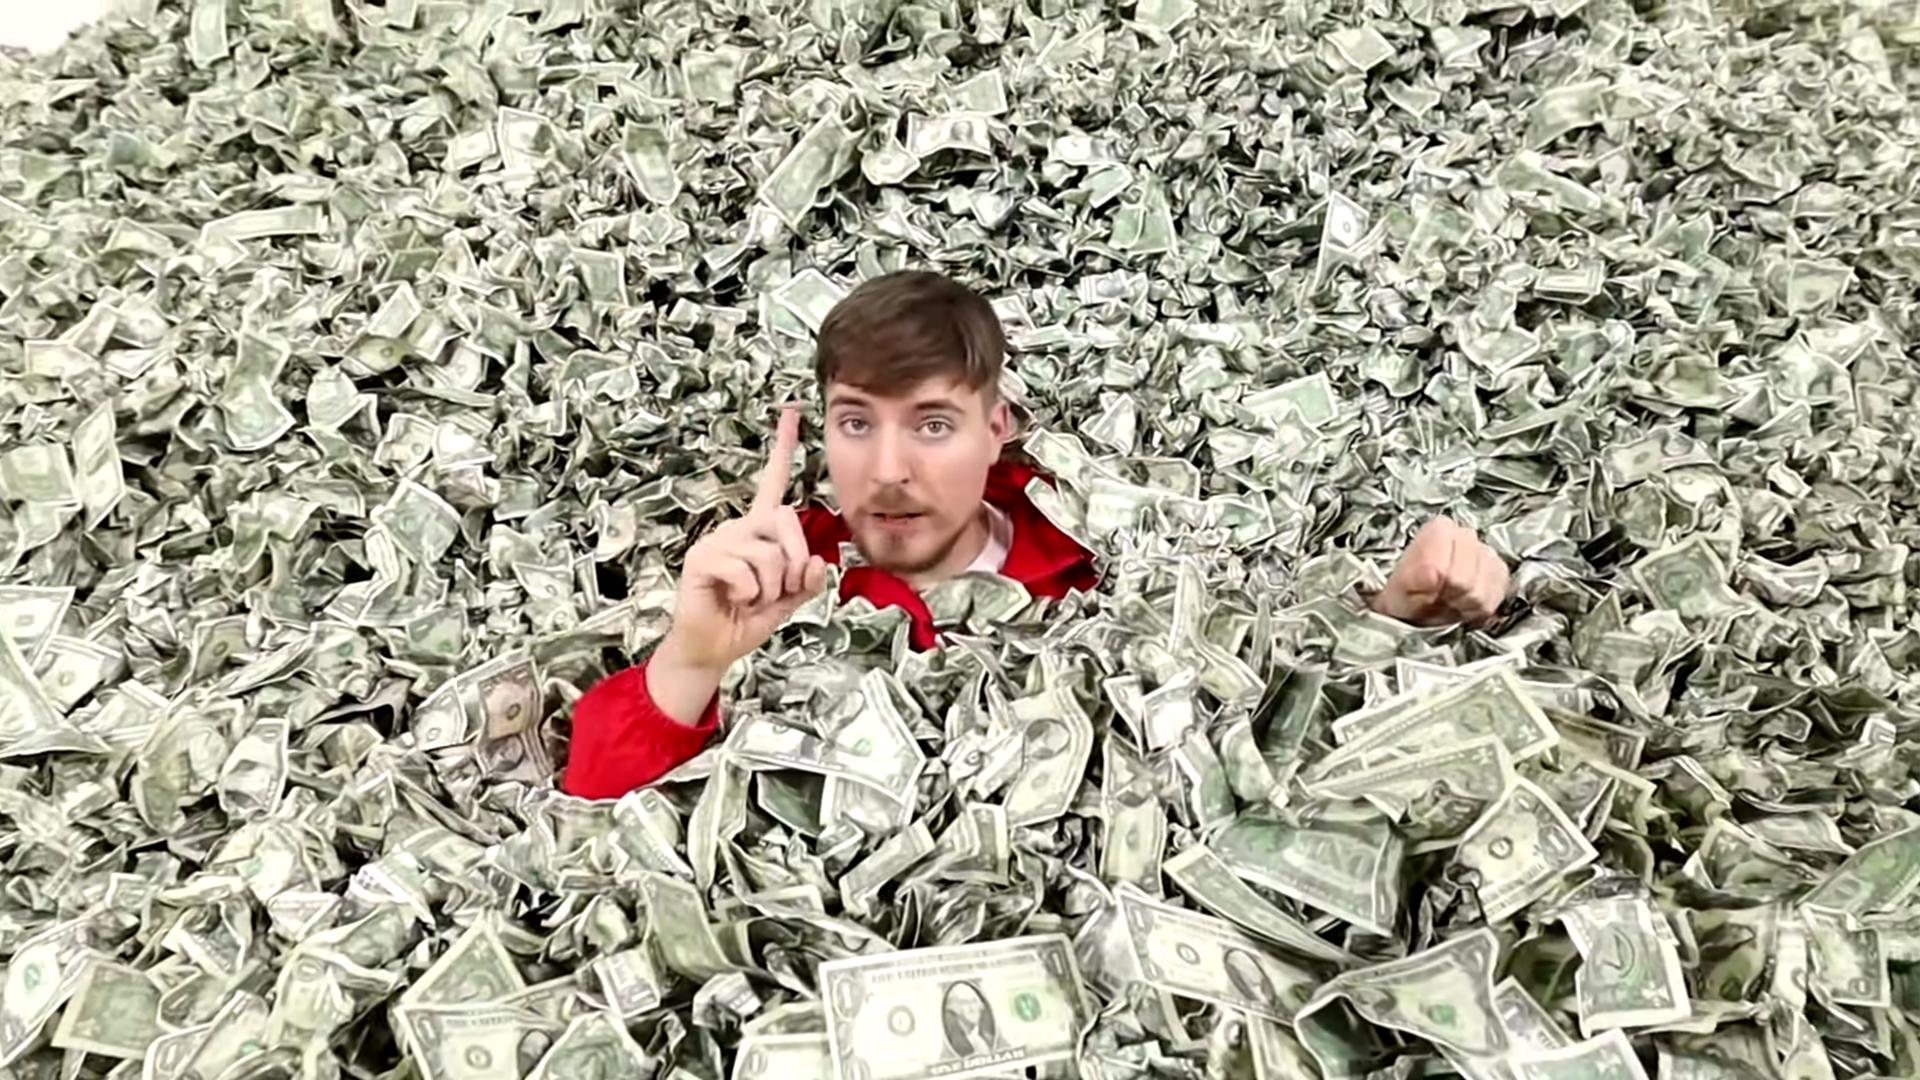 MrBeast Reveals His Annual Video Budget Is Over 48 Million